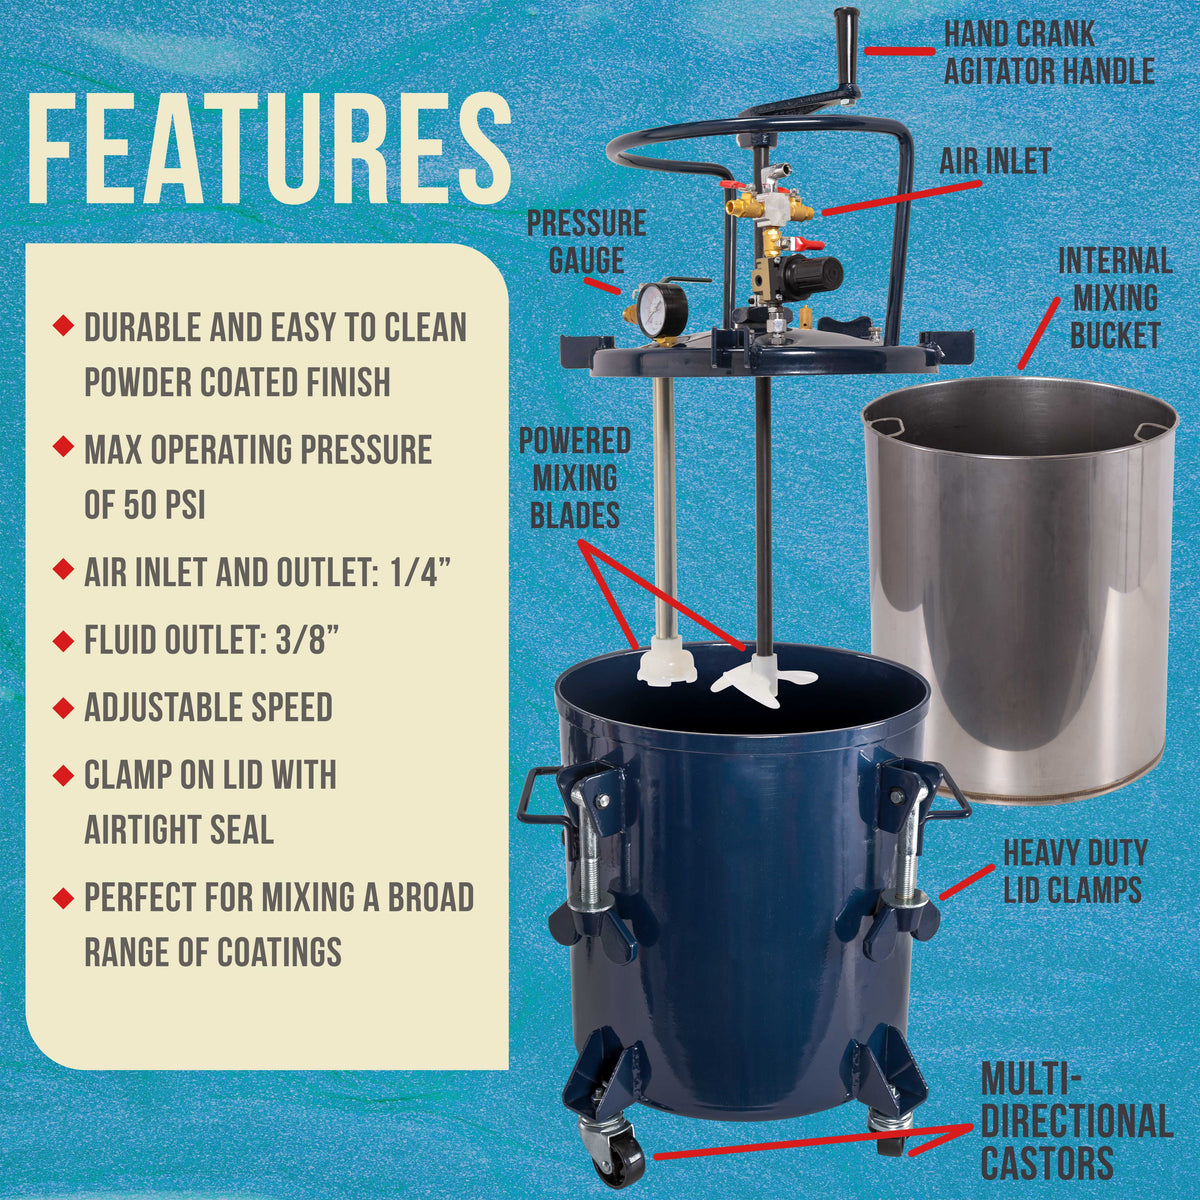 10 Gallon (38 Liters) Pressure Pot Tank for Resin Casting - Heavy Duty  Powder Coated Pot with Air Tight Clamp On Lid, Caster Wheels, Regulator,  Gauge